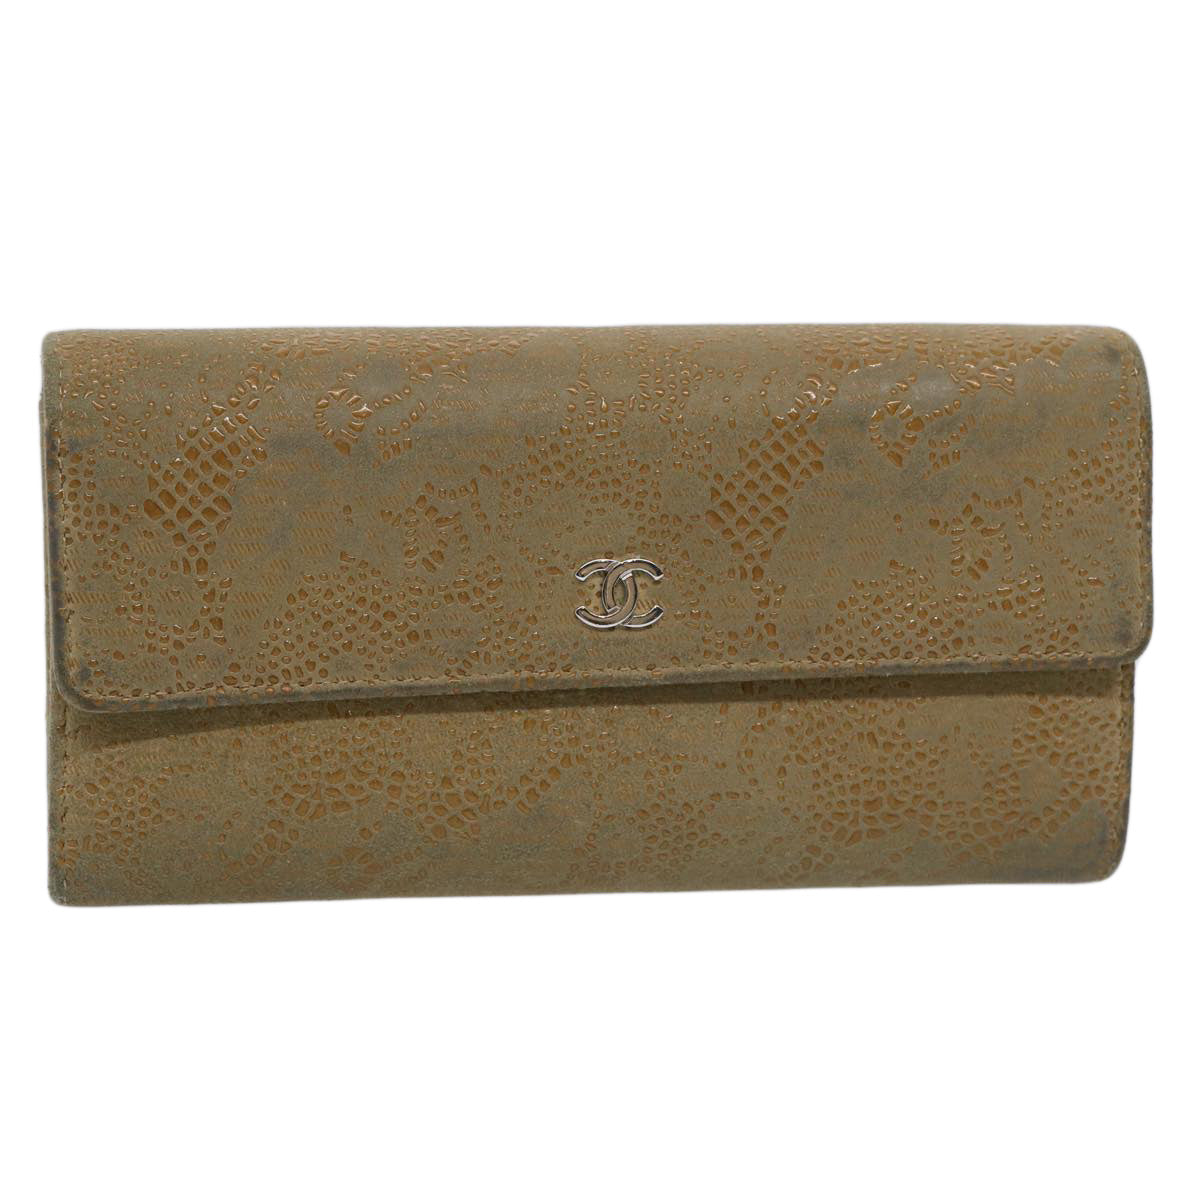 CHANEL Long Wallet Suede Beige CC Auth bs10744 - 0